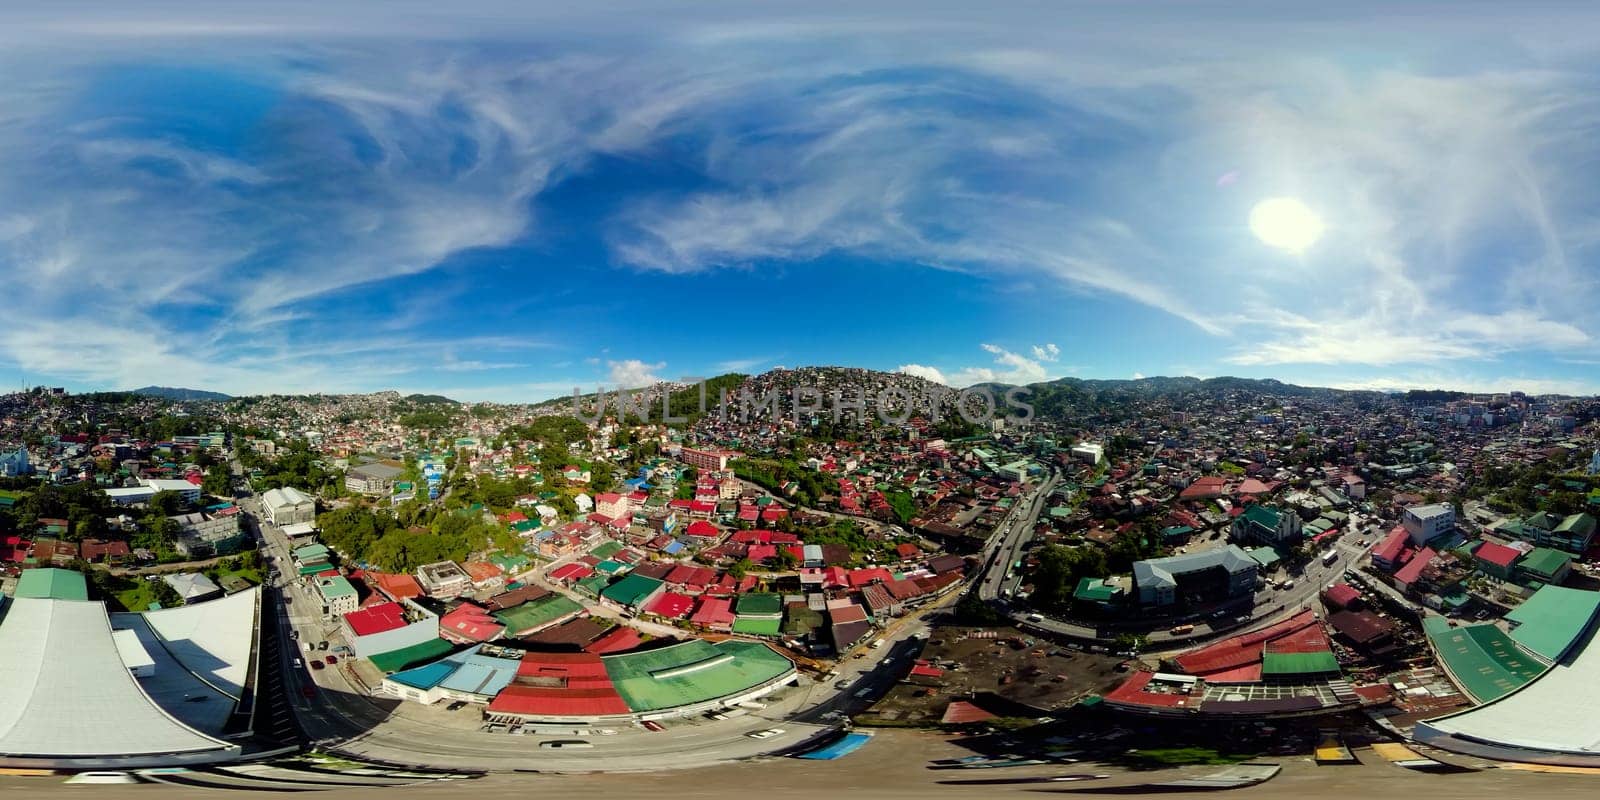 Residential area of Baguio City with colorful houses in a mountainous province. Philippines, Luzon. 360VR.